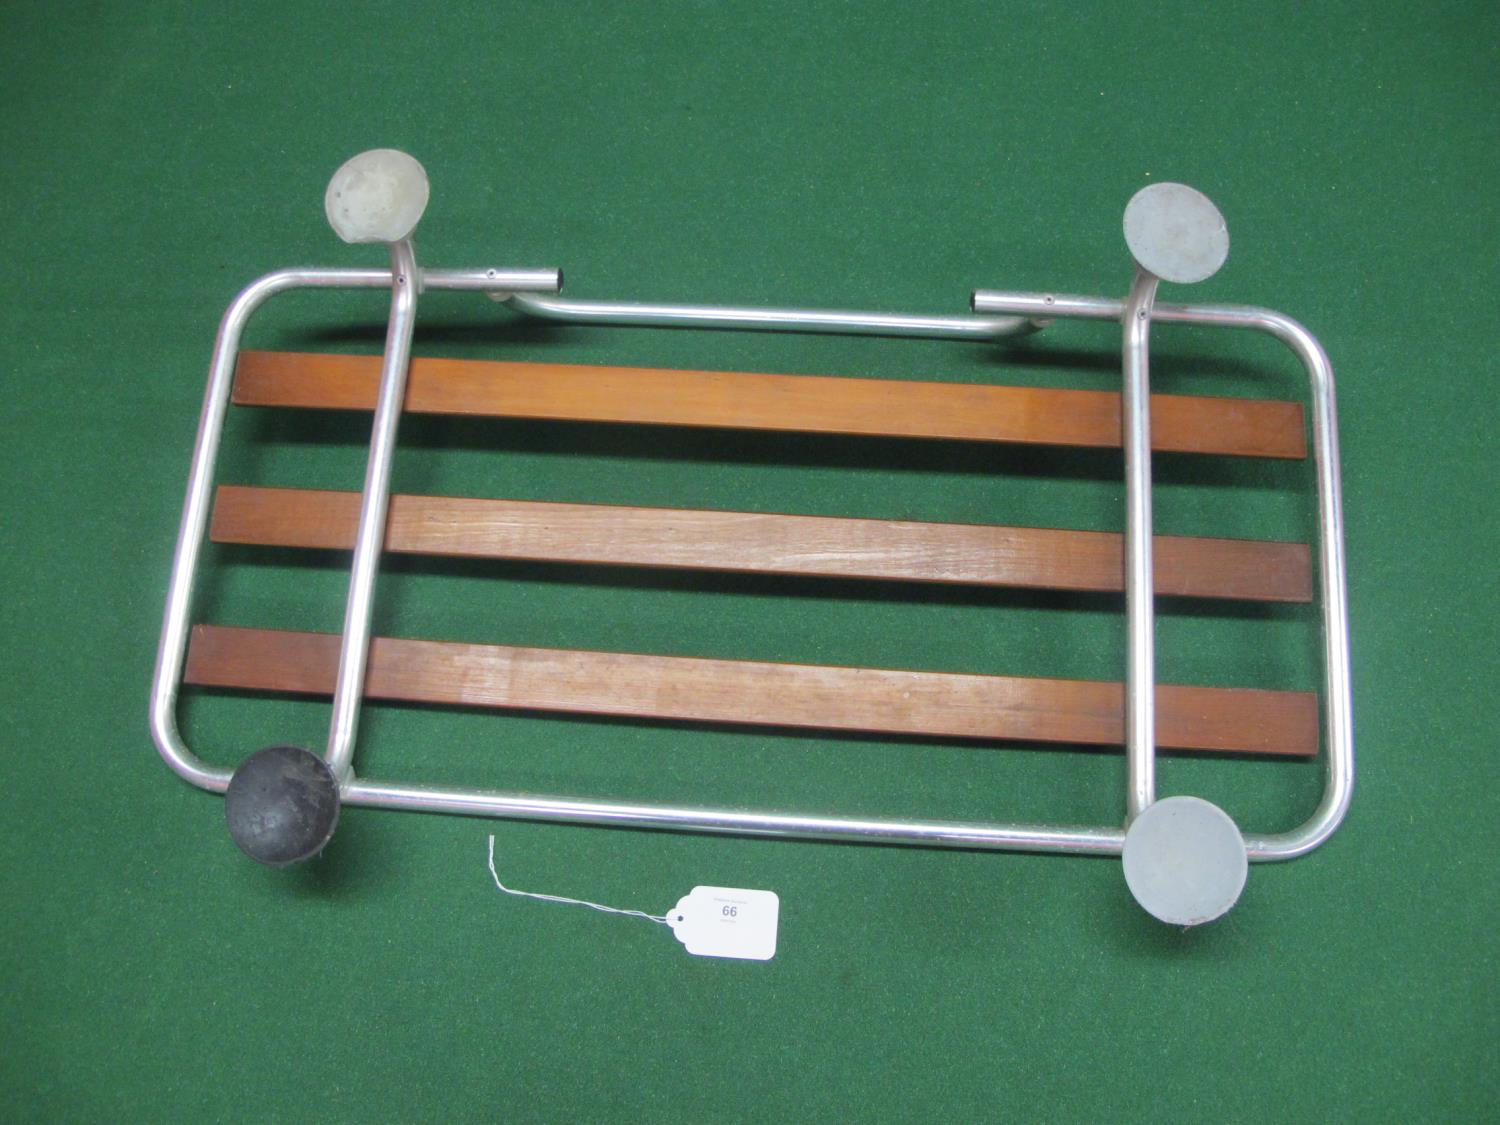 Aluminium and wood boot rack for MGS, Triumphs etc - 33.5" x 16.25" Please note descriptions are not - Image 2 of 3